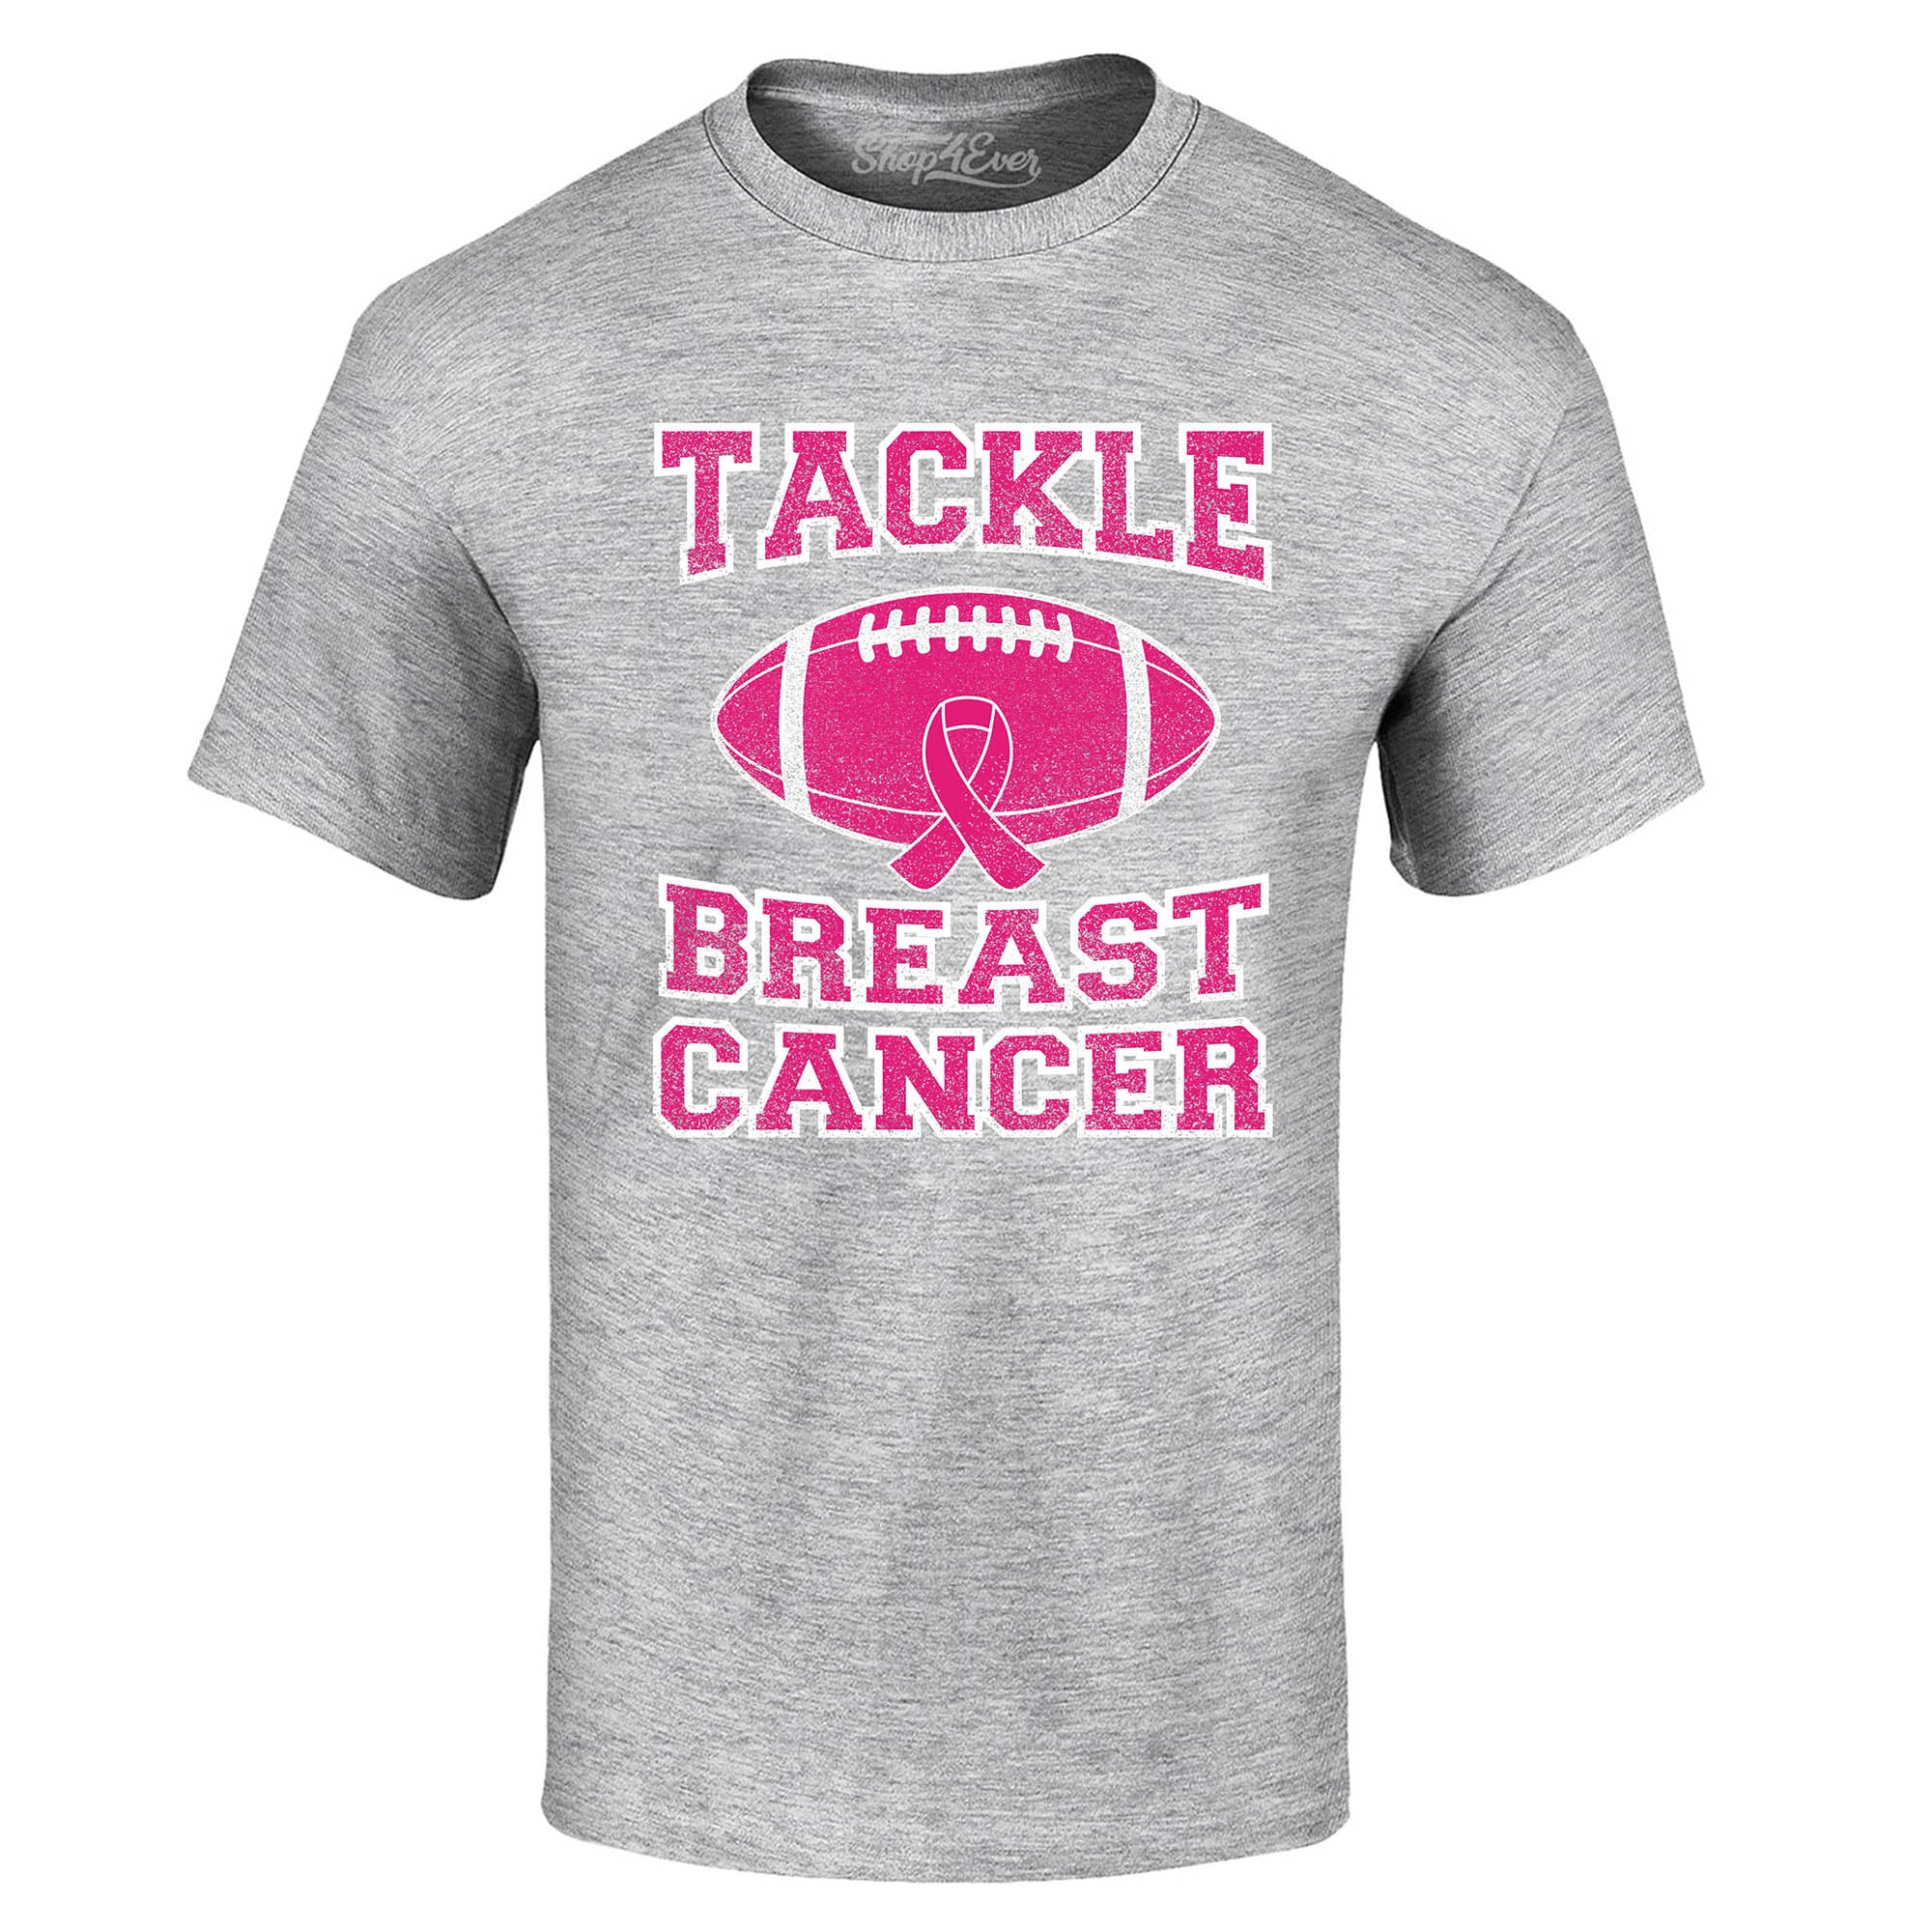 Tackle Breast Cancer T-Shirt Support Awareness Tee Shirts